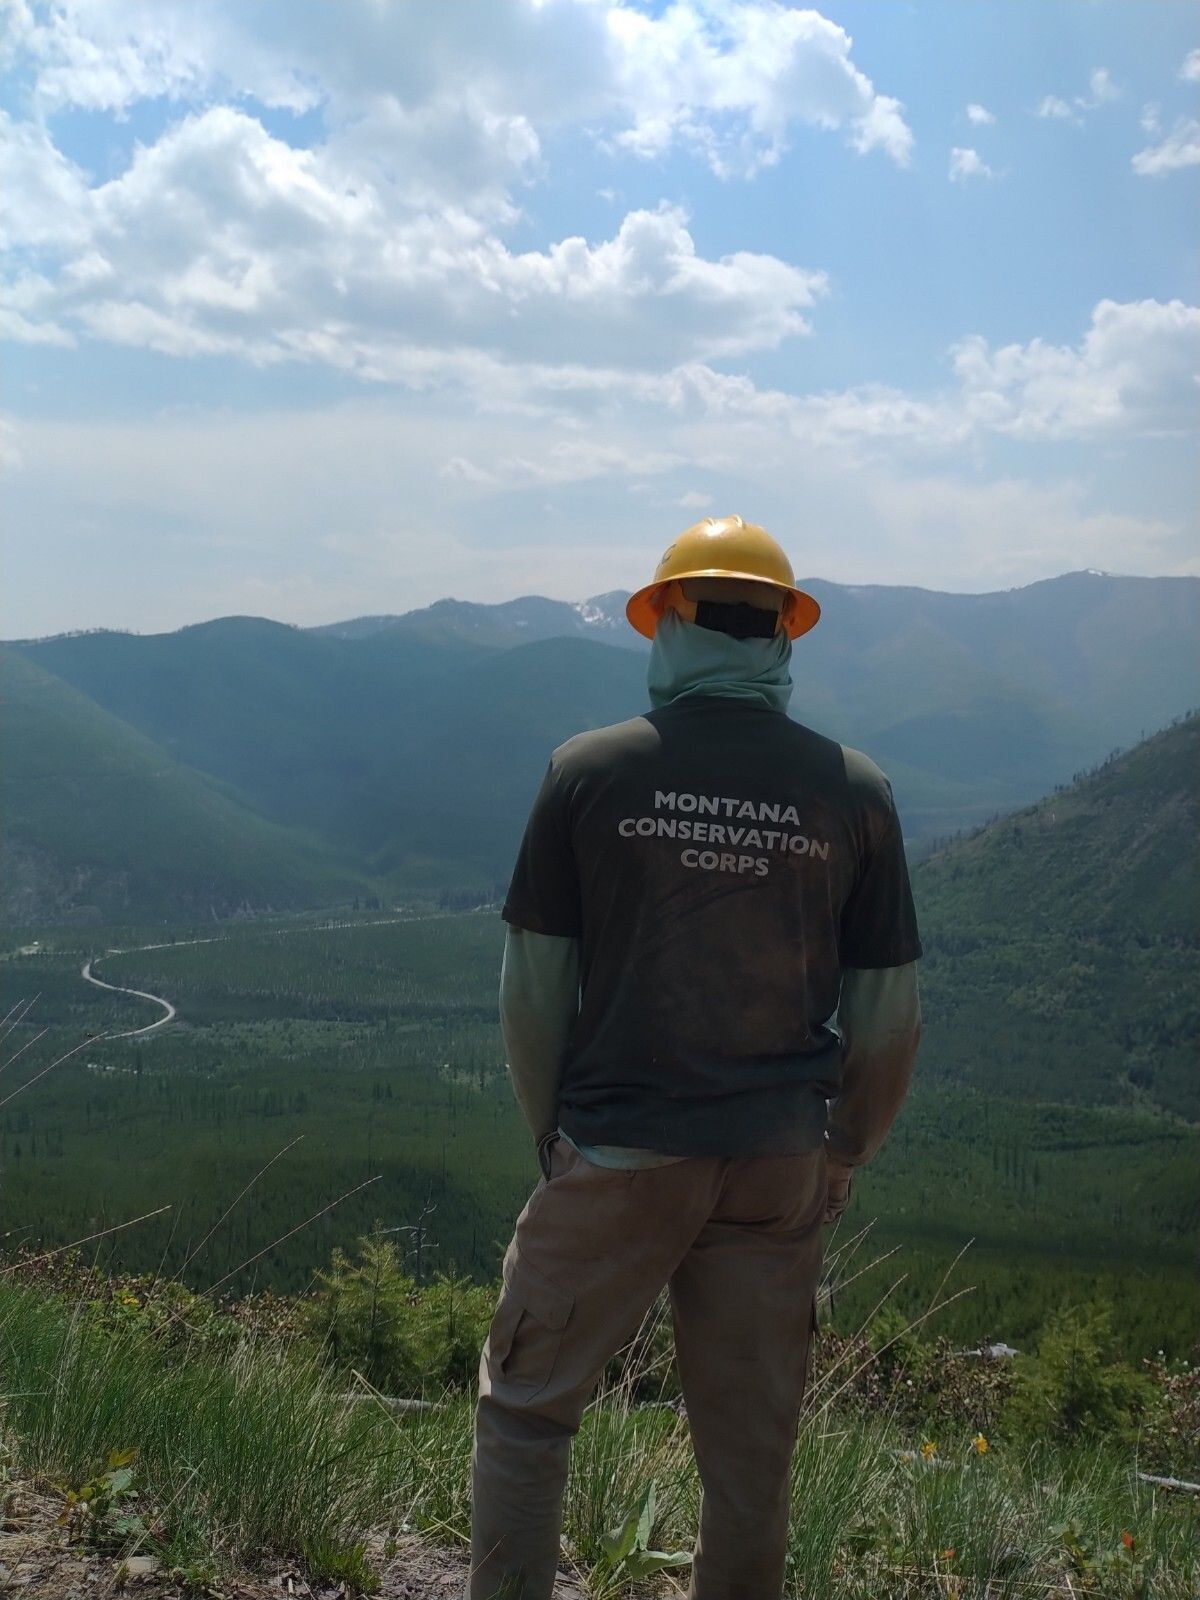 A crew member wearing an MCC shirt and helmet faces away from the camera, looking down into a valley.